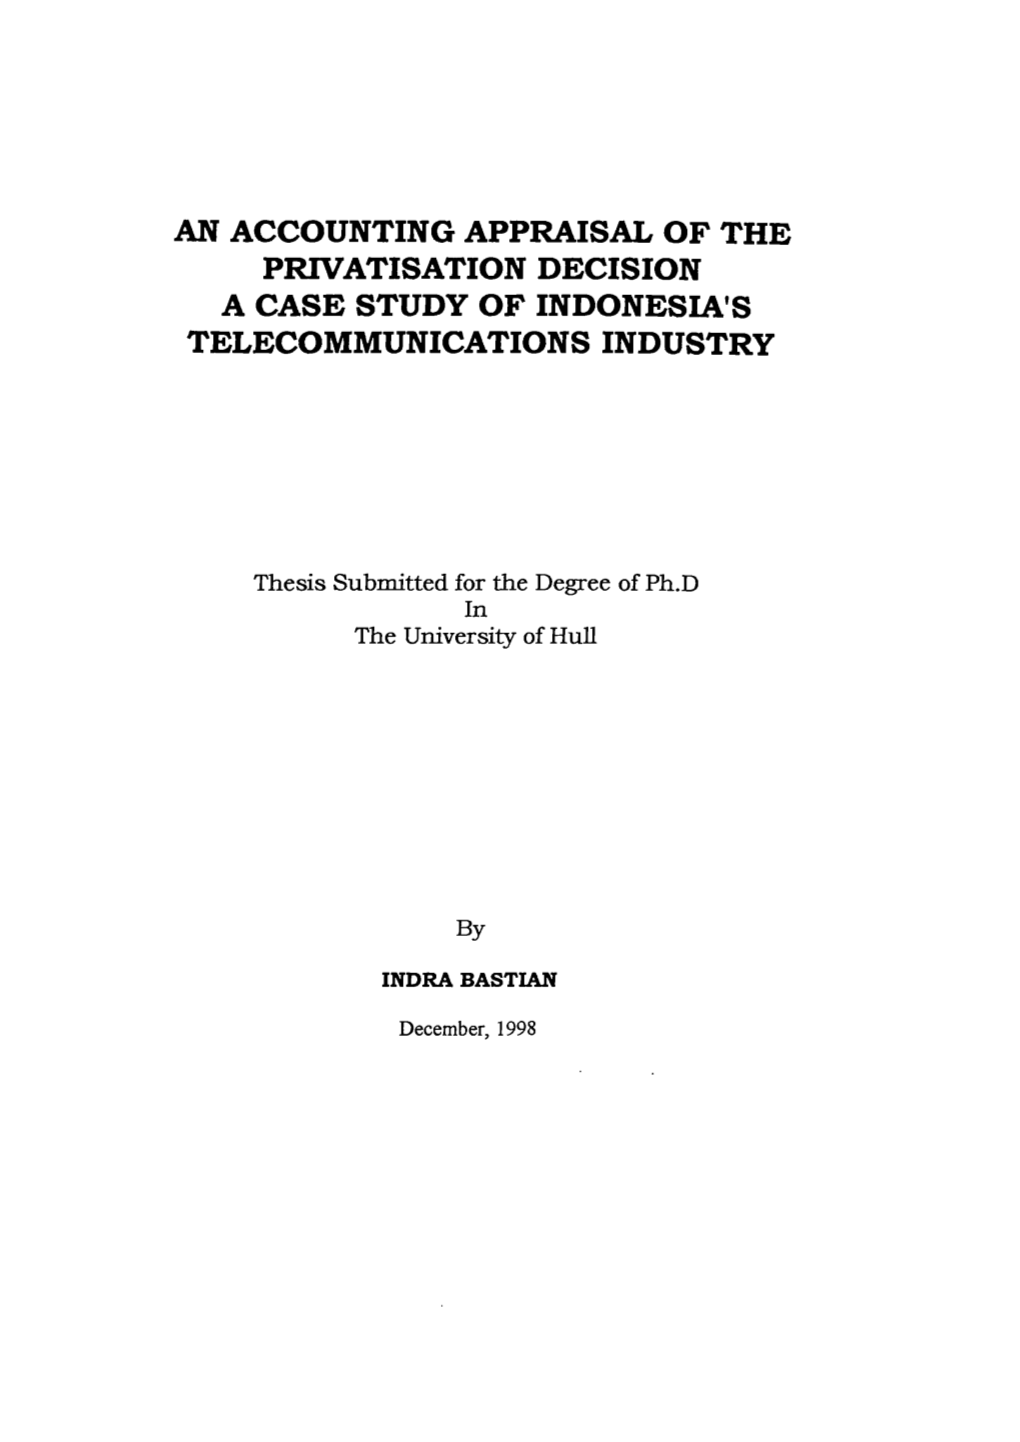 Thesis Submitted for the Degree of Ph.D in the University of Hull By